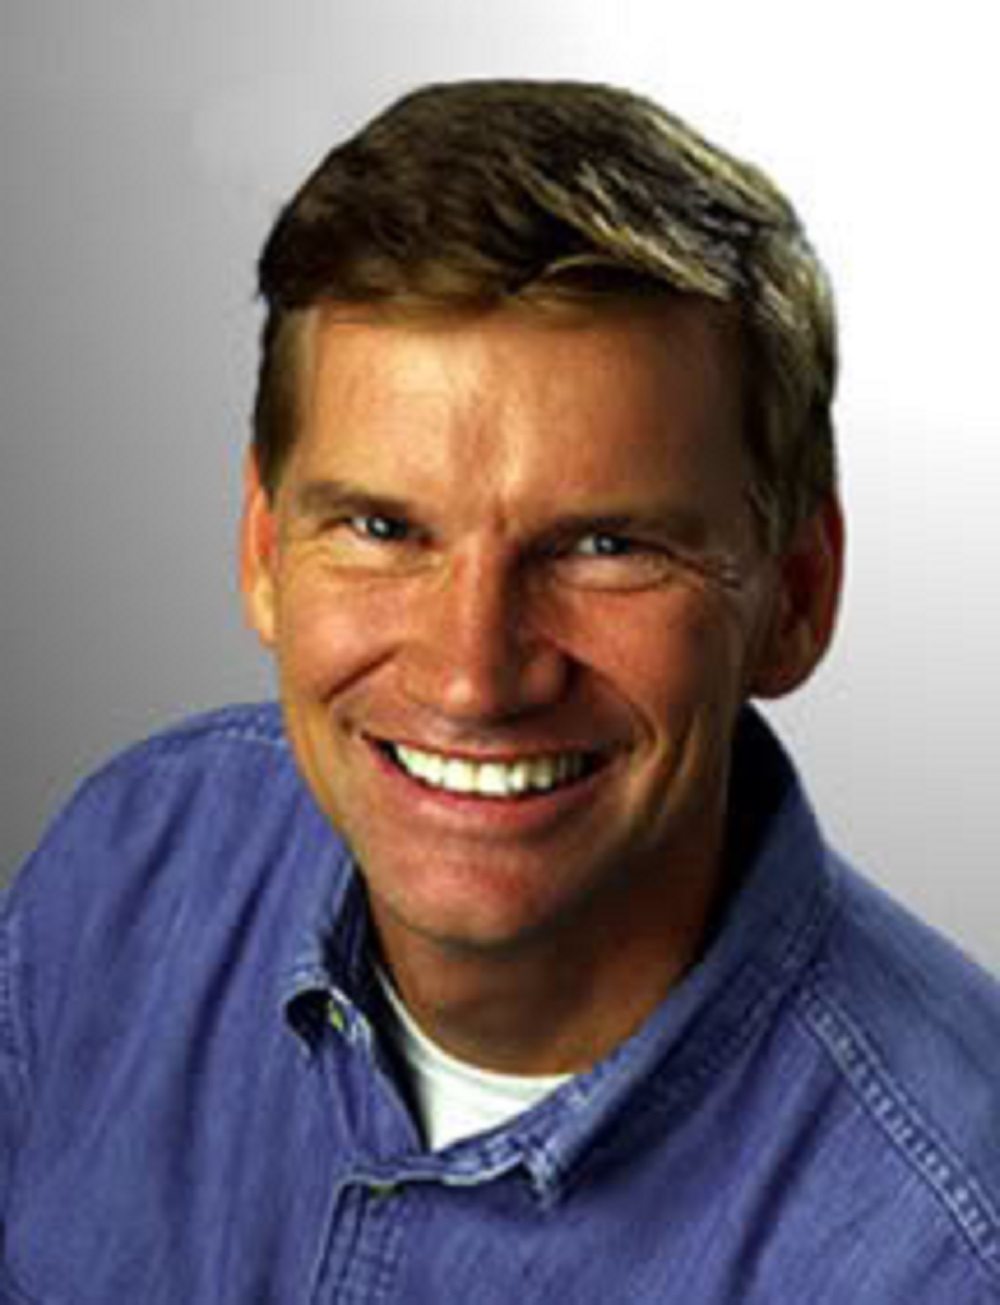 Ted haggard and gays